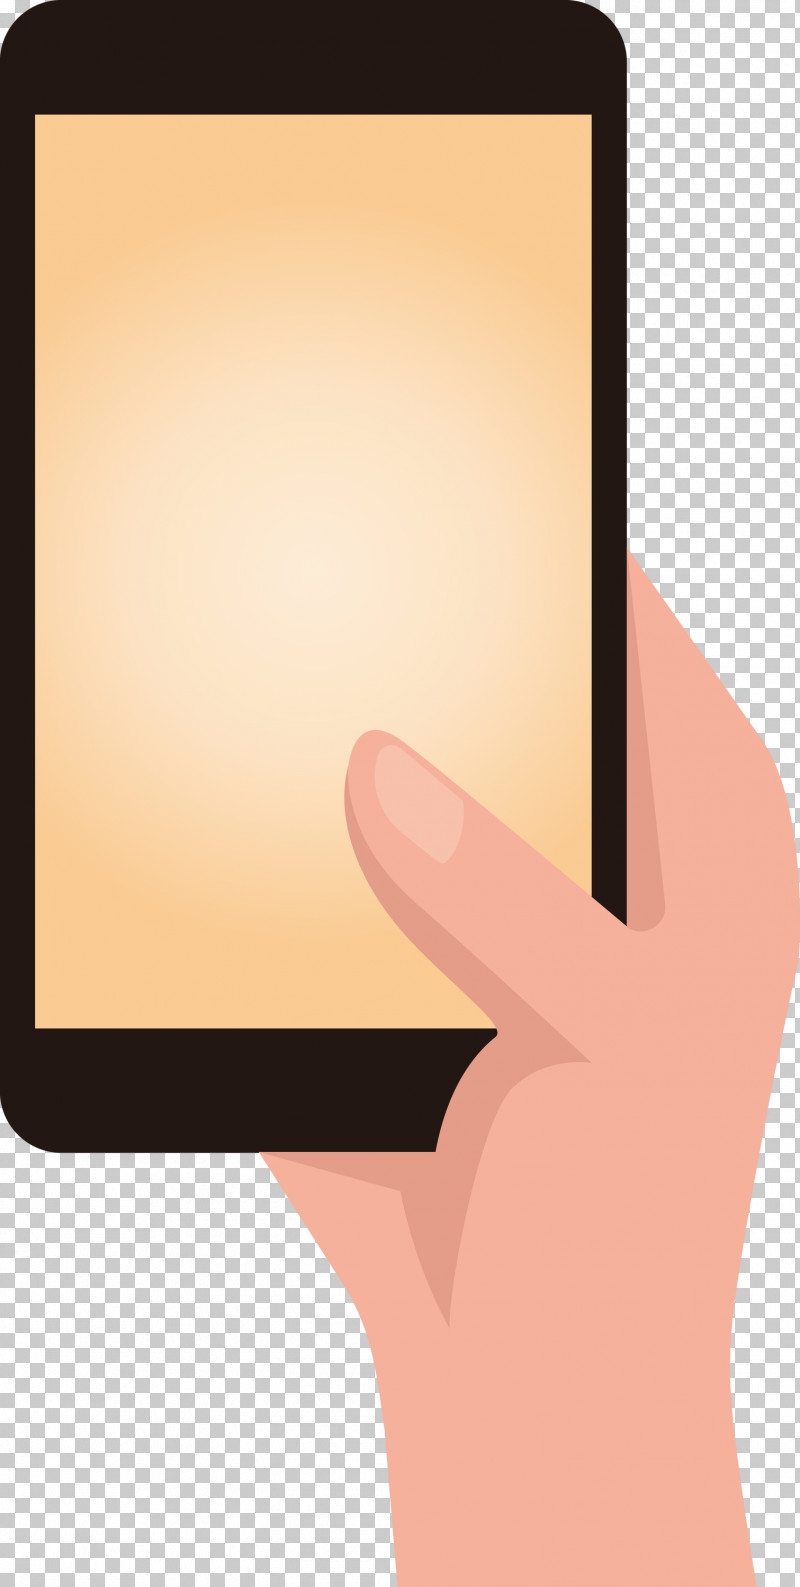 Smartphone Hand PNG, Clipart, Biology, Computer, Geometry, Hand, Hm Free PNG Download